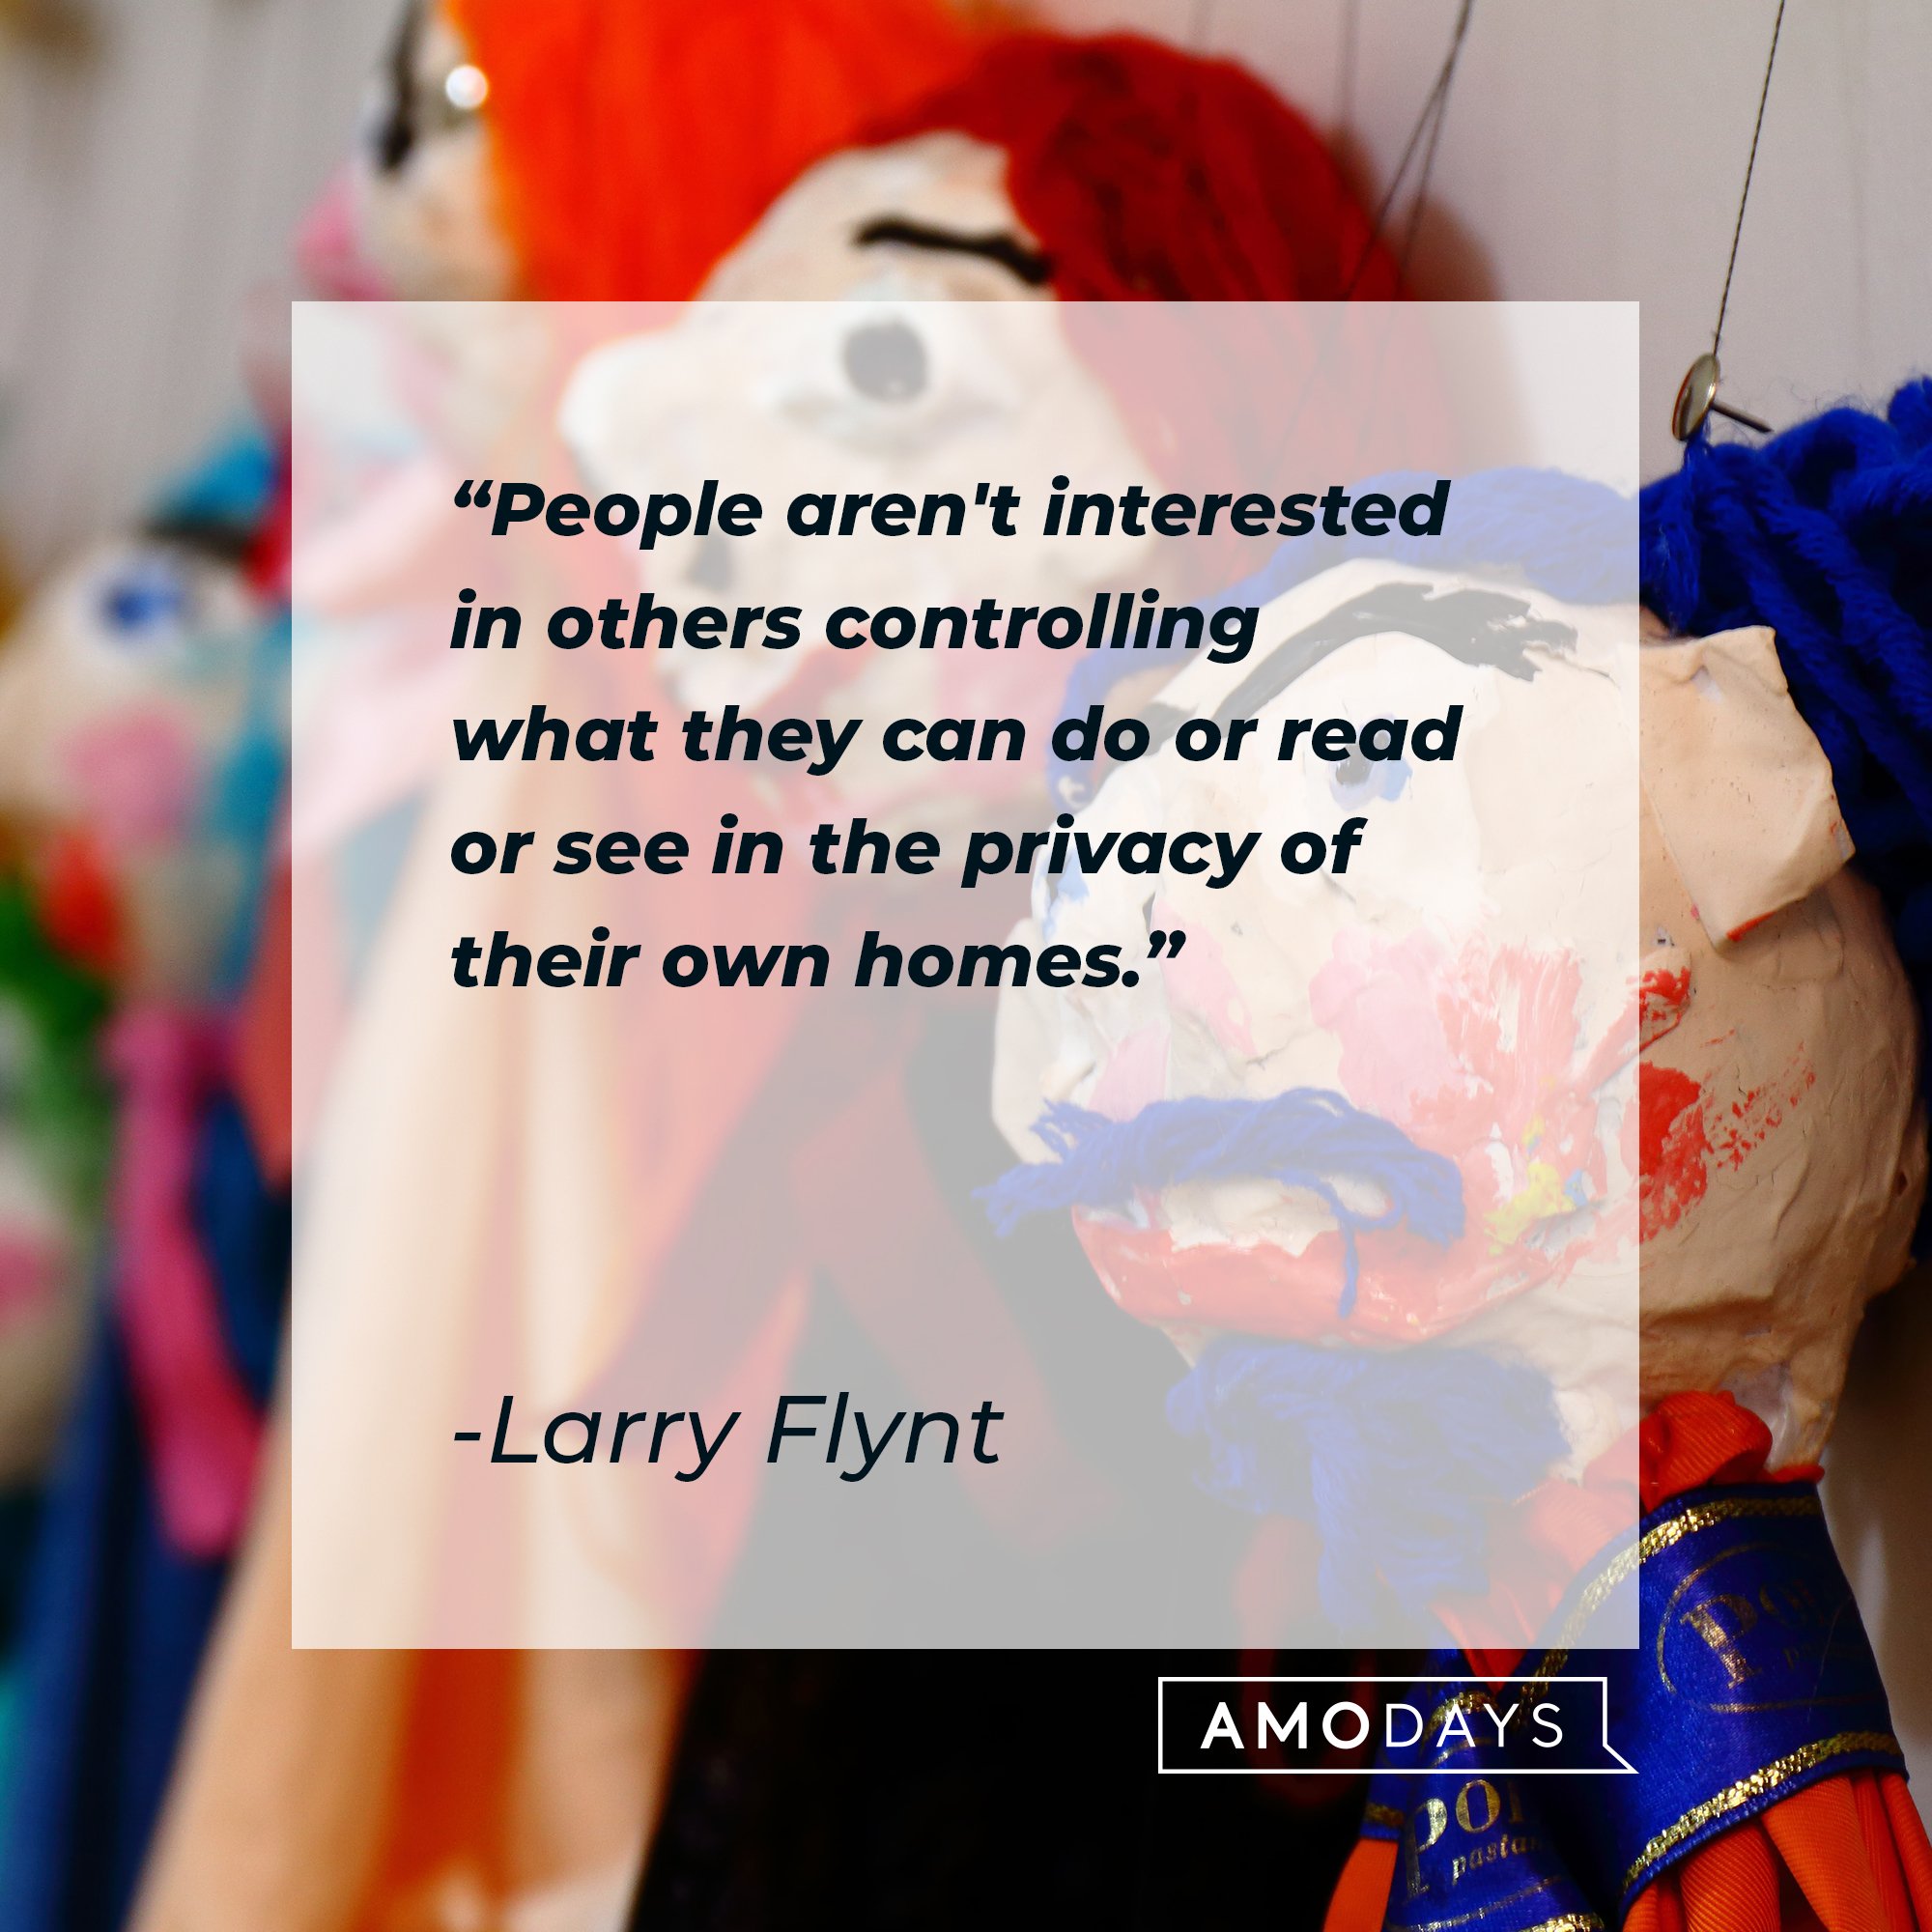 Larry Flynt's quote: "People aren't interested in others controlling what they can do or read or see in the privacy of their own homes." | Image: AmoDays